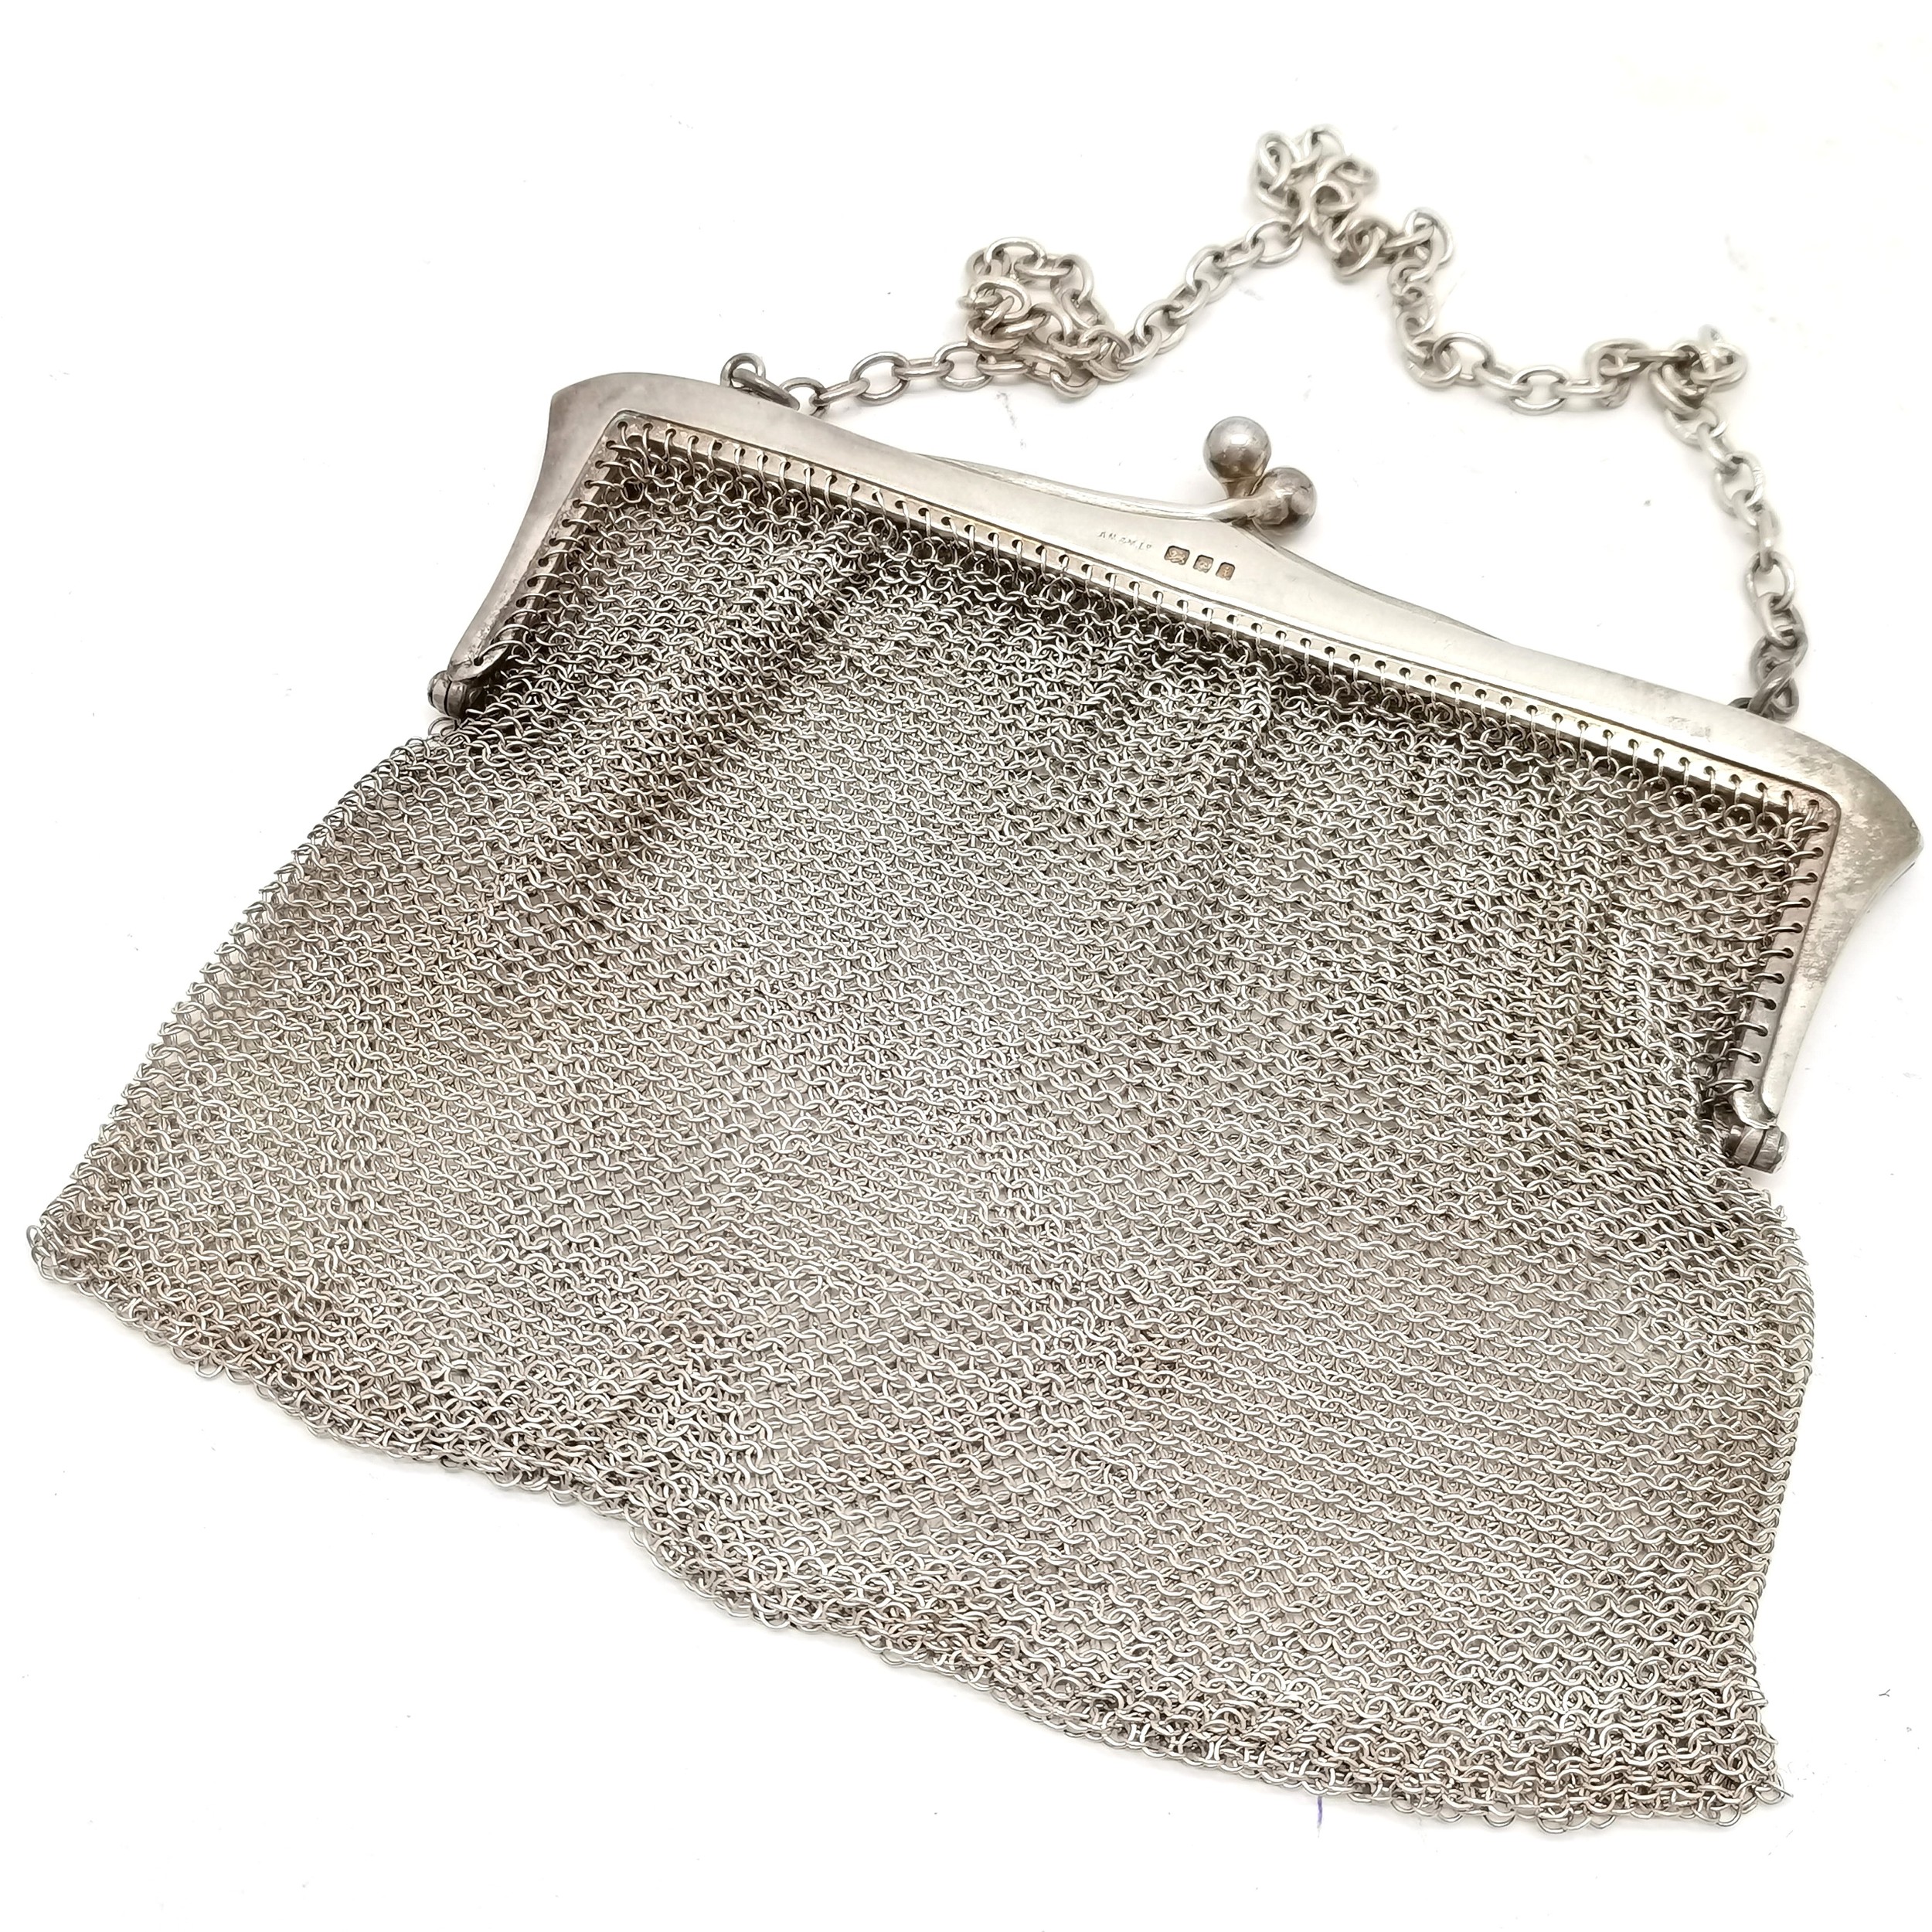 1924 silver mesh purse by AM&M Ld (13cm x 13cm and slight a/f) t/w silver napkin ring & silver - Image 3 of 4